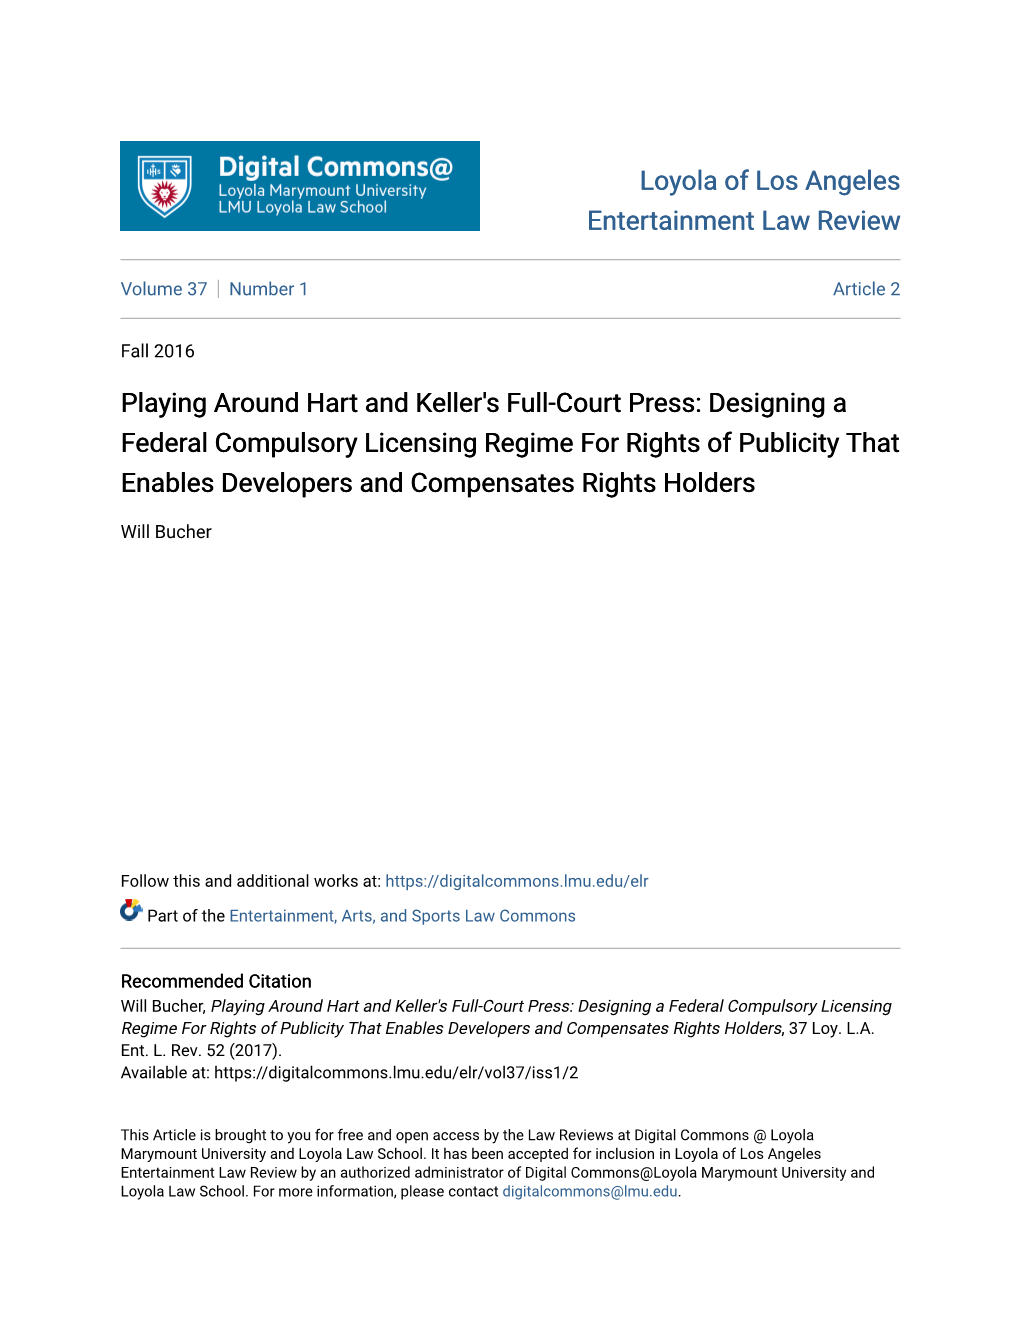 Designing a Federal Compulsory Licensing Regime for Rights of Publicity That Enables Developers and Compensates Rights Holders